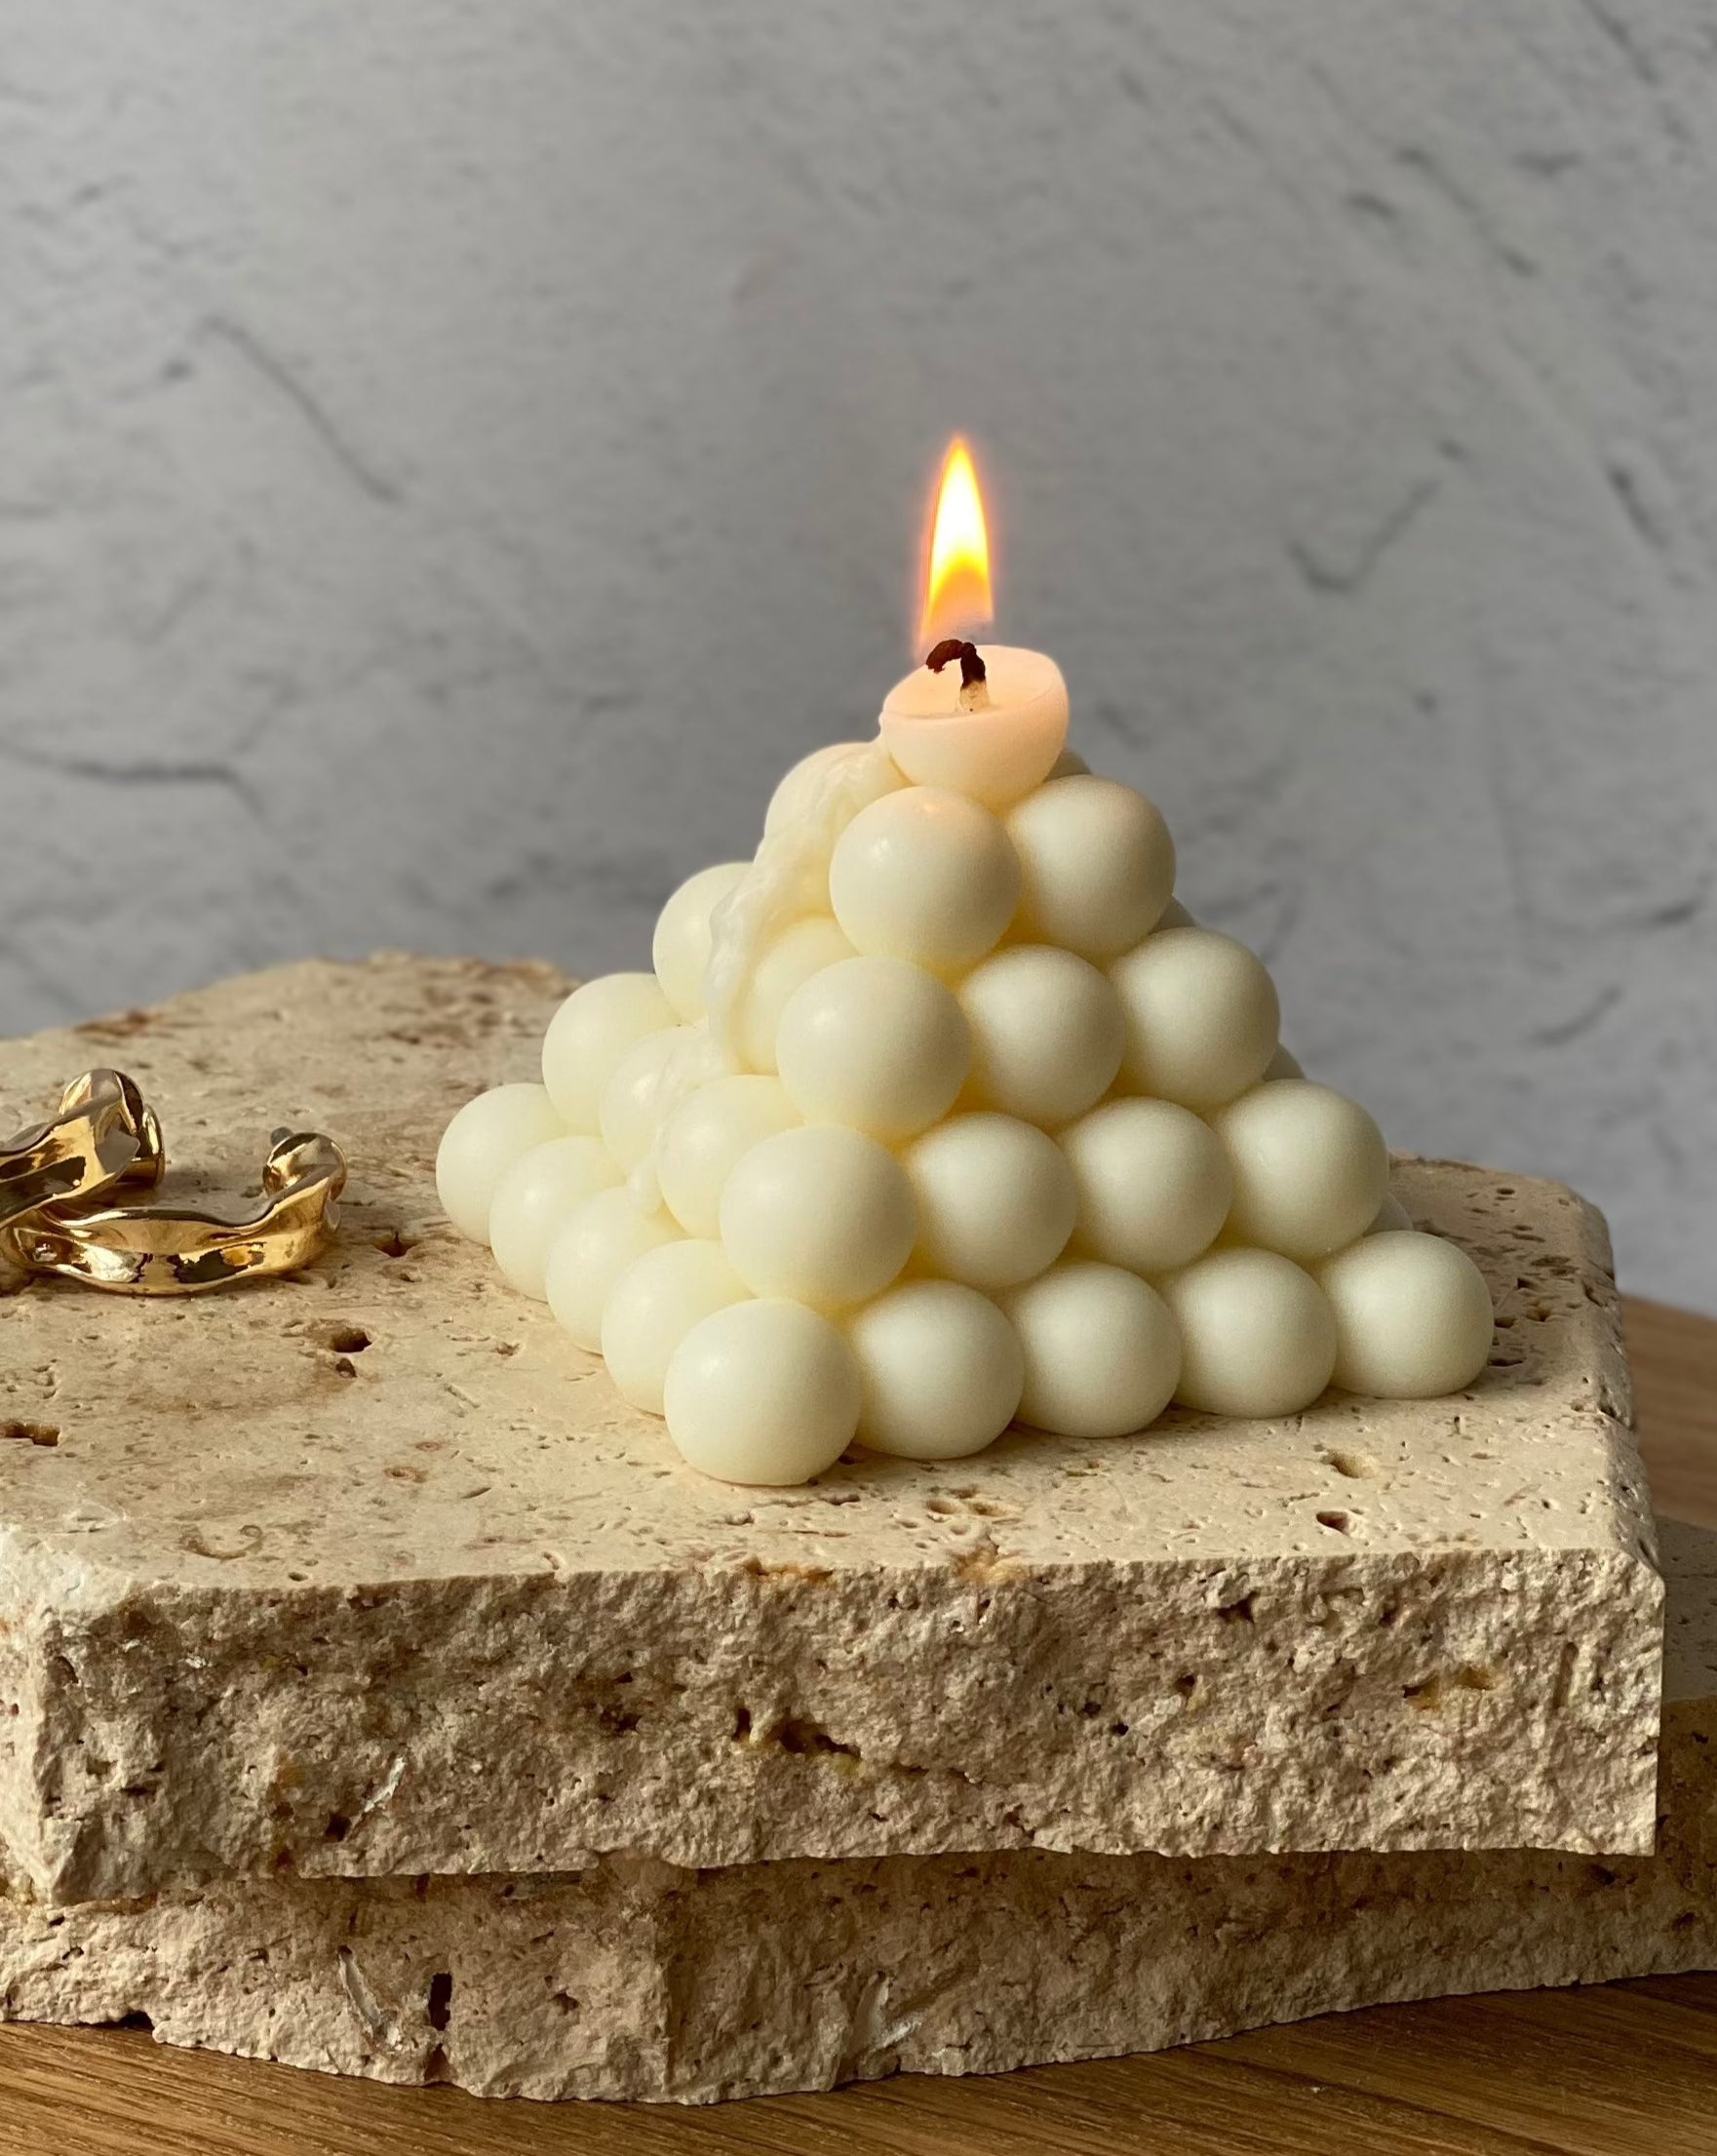 Bubble Pyramid Candle Australia | Sculptural Candle Australia | Candle Decorations | Home Decorations | Bubble Candles | Free Standing Candles | Clean Candles | Sculptural Candles | Candles Australia | Scented Candles | Unscented Candle